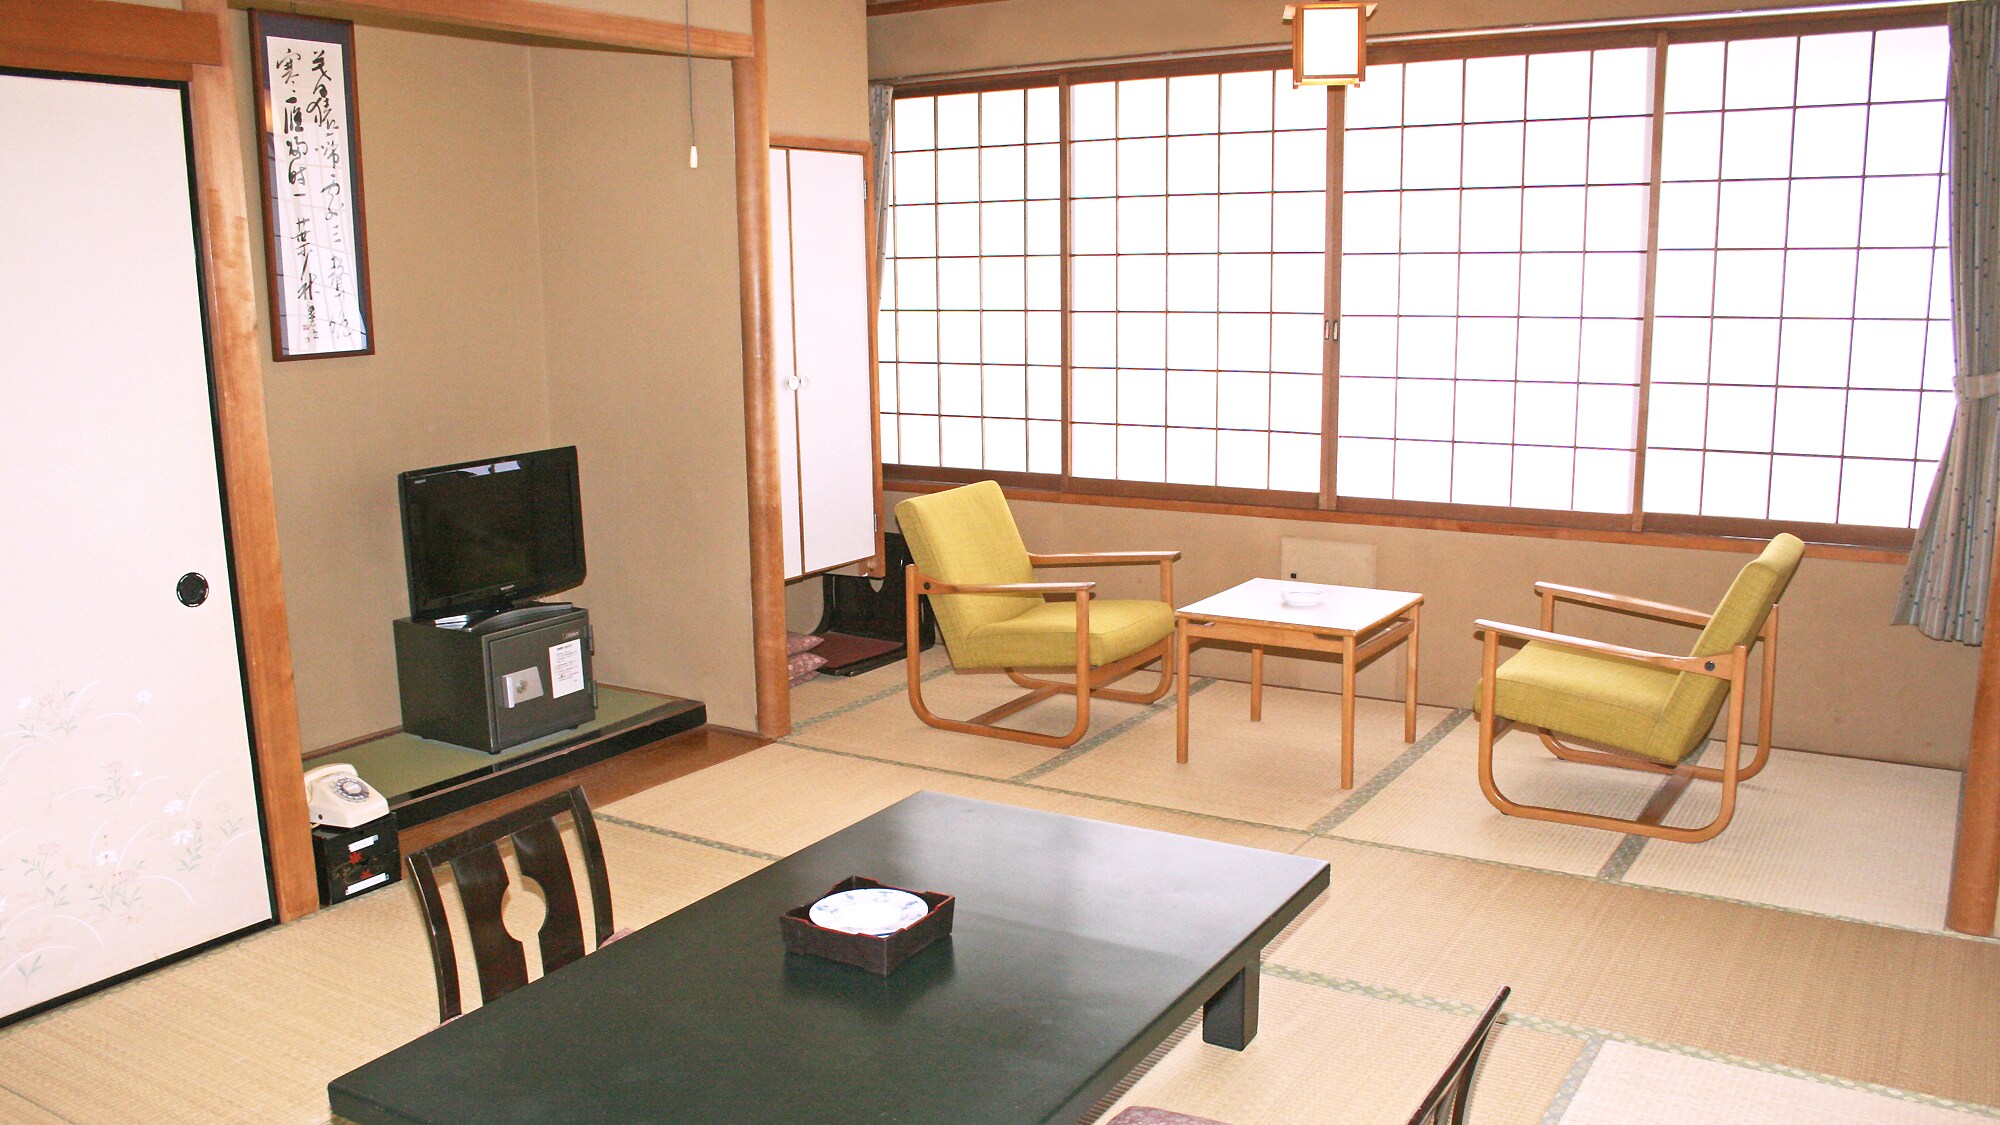 ≪West building Japanese style room 10 tatami mats≫